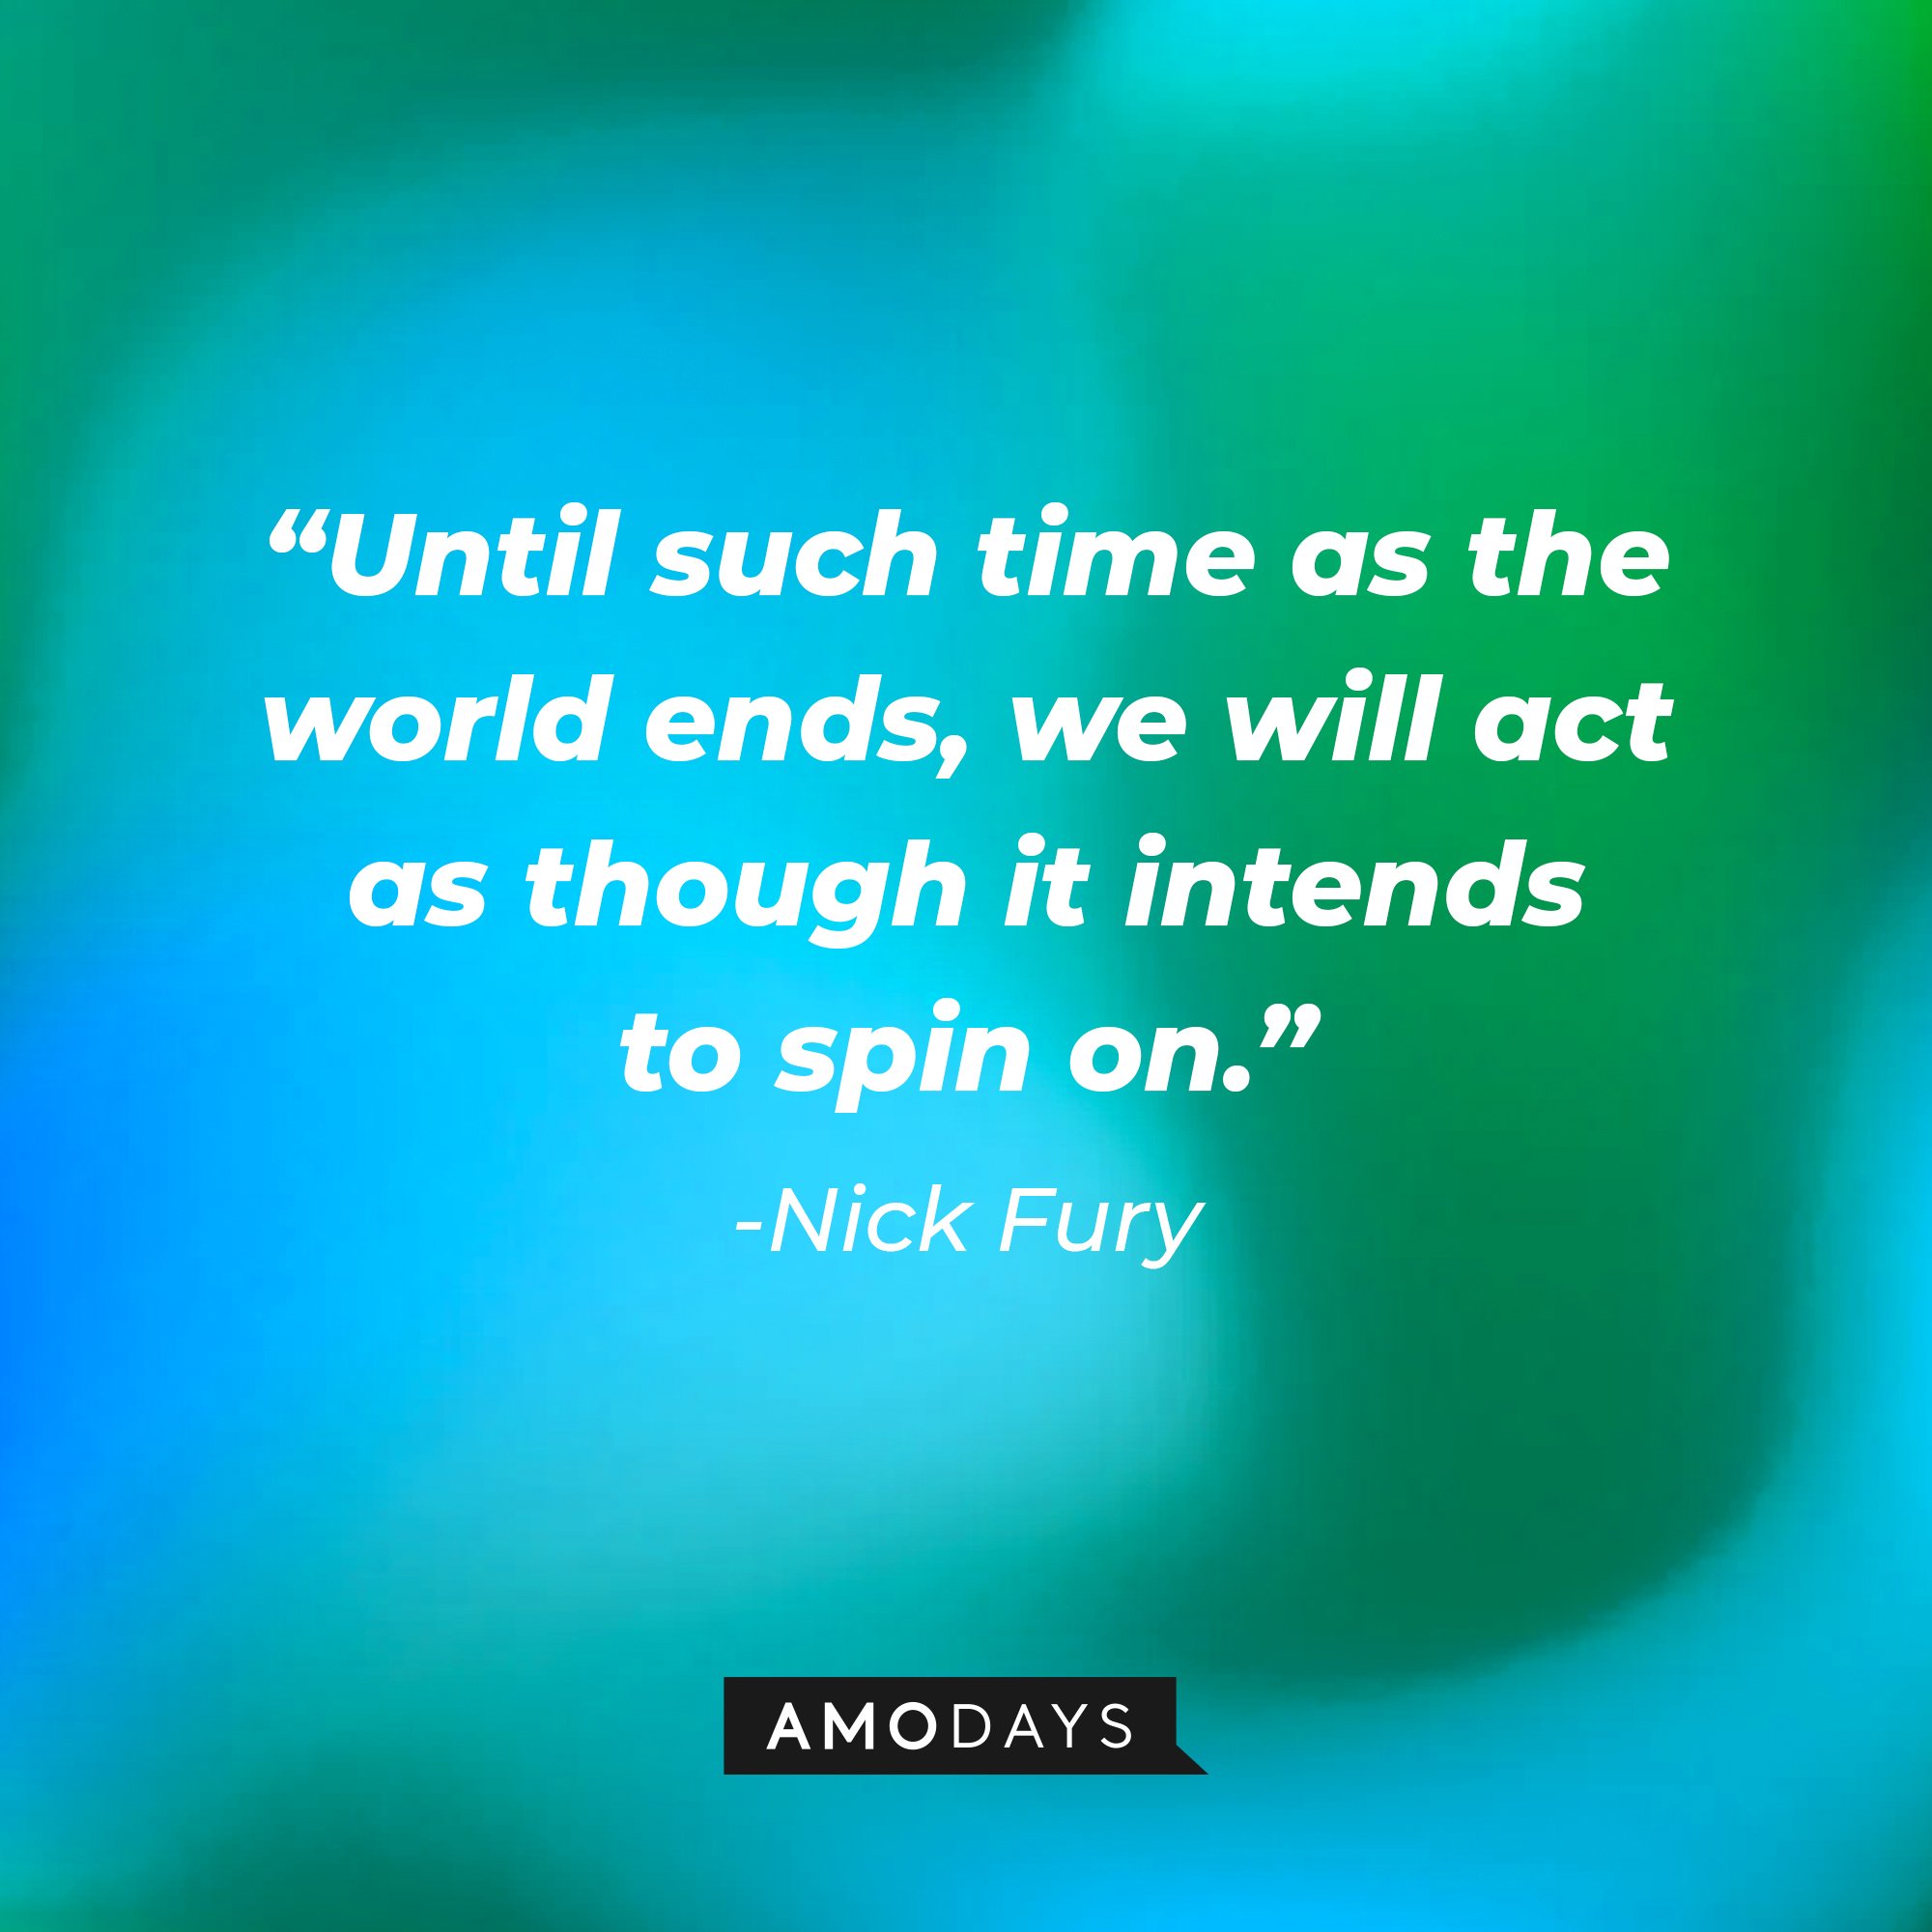 Nick Fury's quote: “Until such time as the world ends, we will act as though it intends to spin on.” | Image: AmoDays